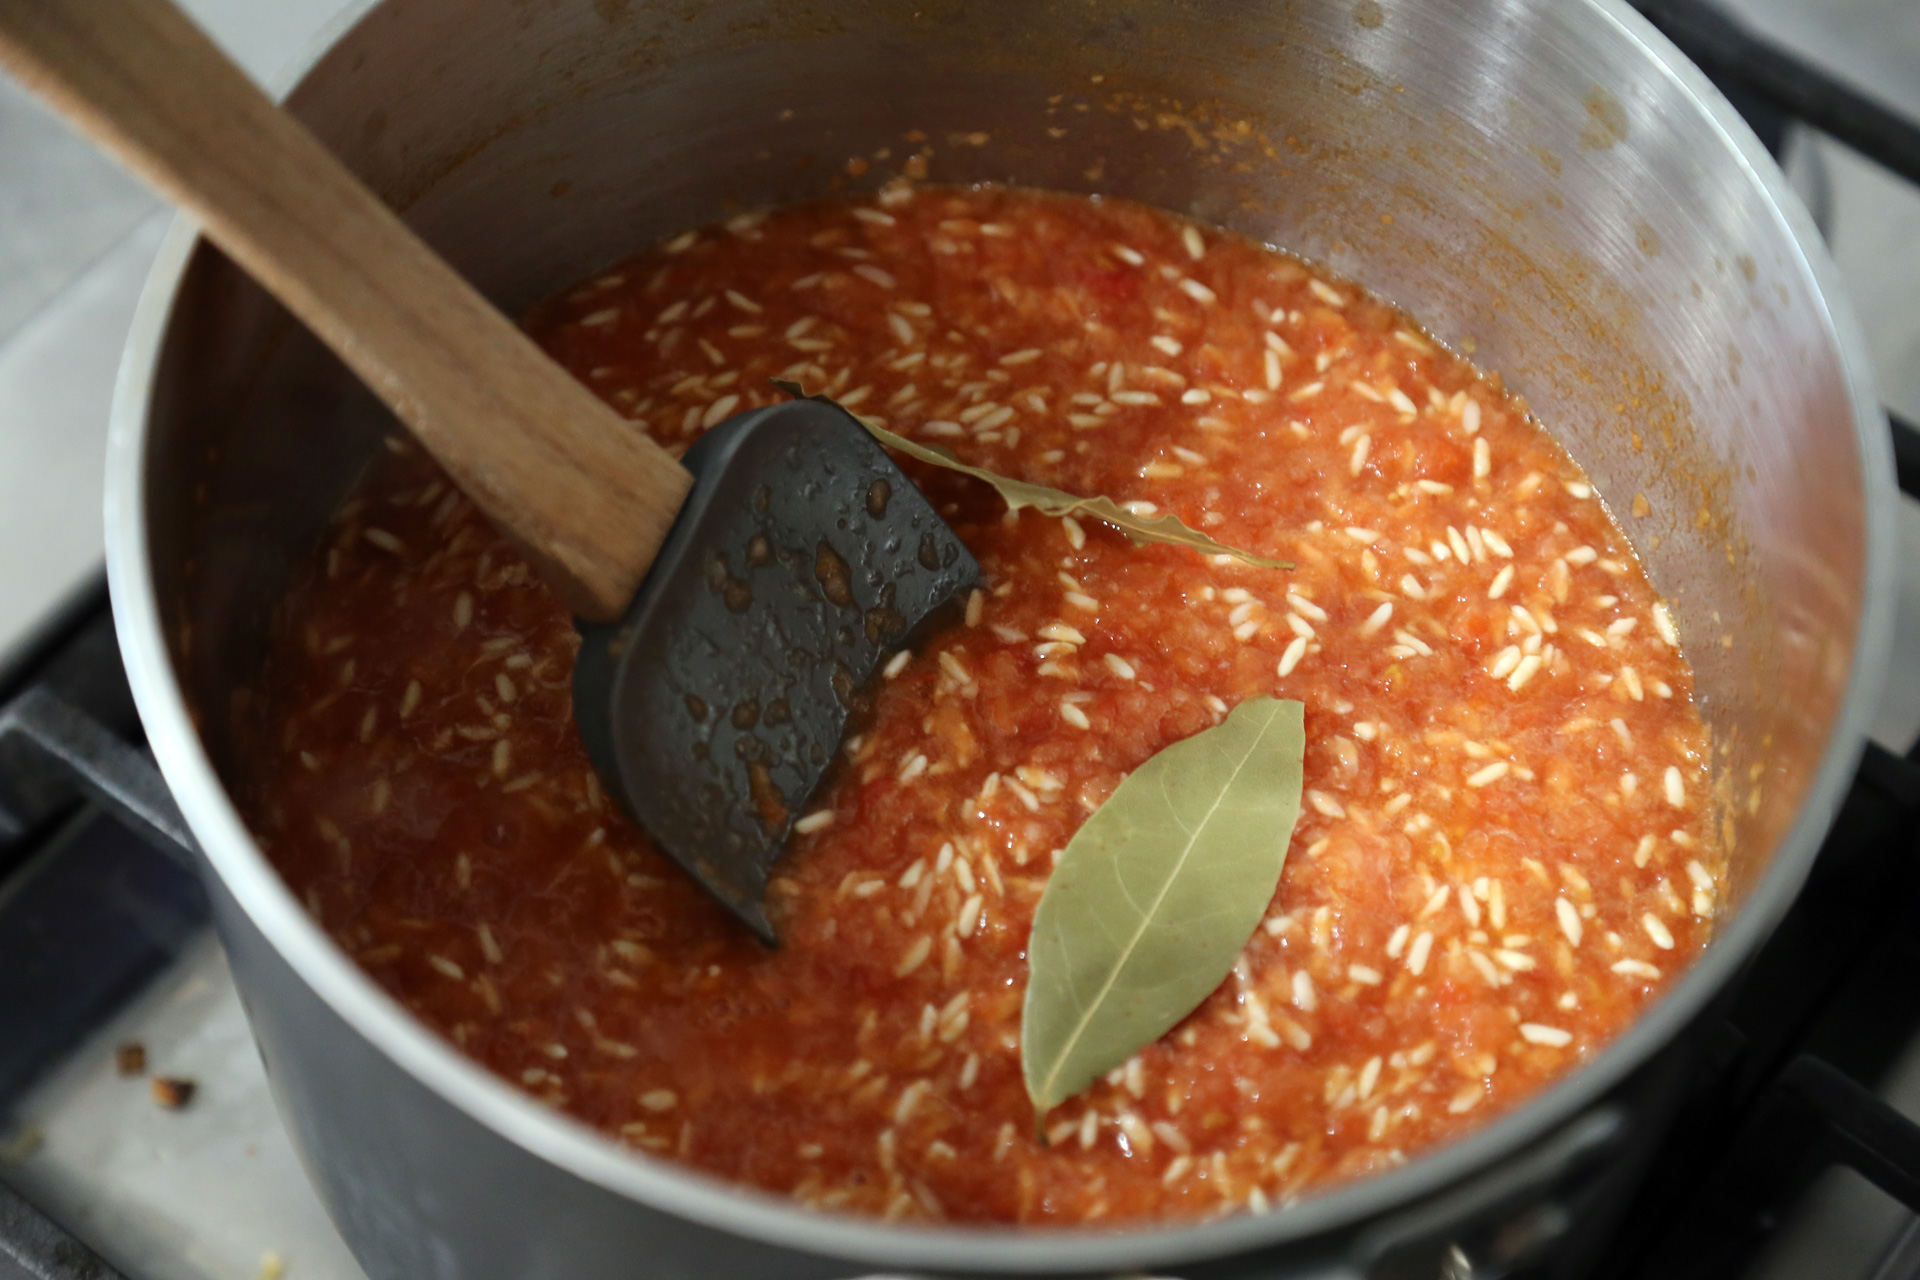 Add the salt and bay leaves and stir to combine. Bring to a boil, cover, and reduce the heat to low. Let simmer, covered, for 20 minutes. Turn off the heat and leave the rice to steam for 10 minutes without lifting the lid.